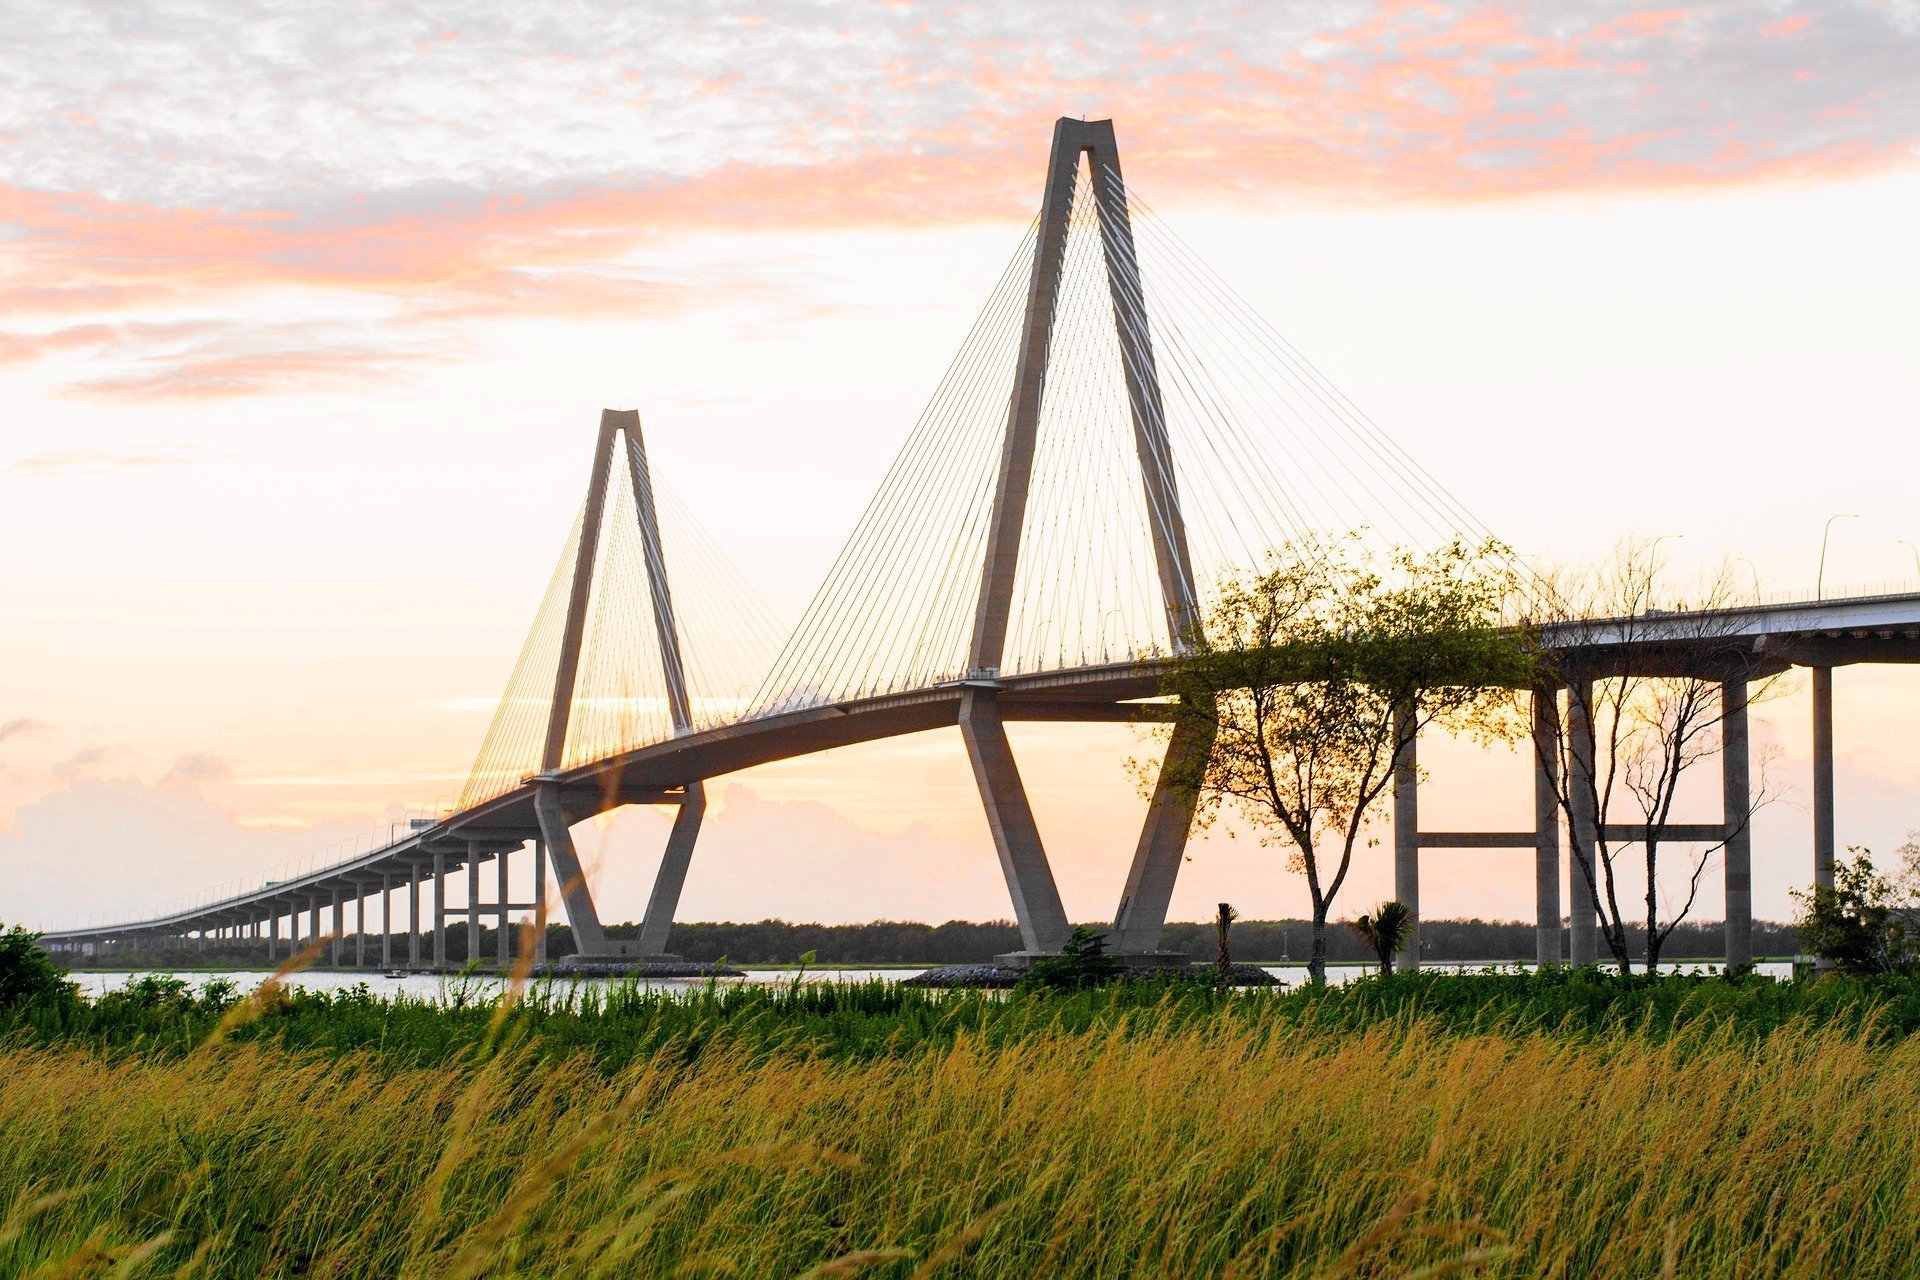 Discover the top attractions in Charleston, South Carolina. Explore what to do in Charleston if you have a whole week or just a few days!